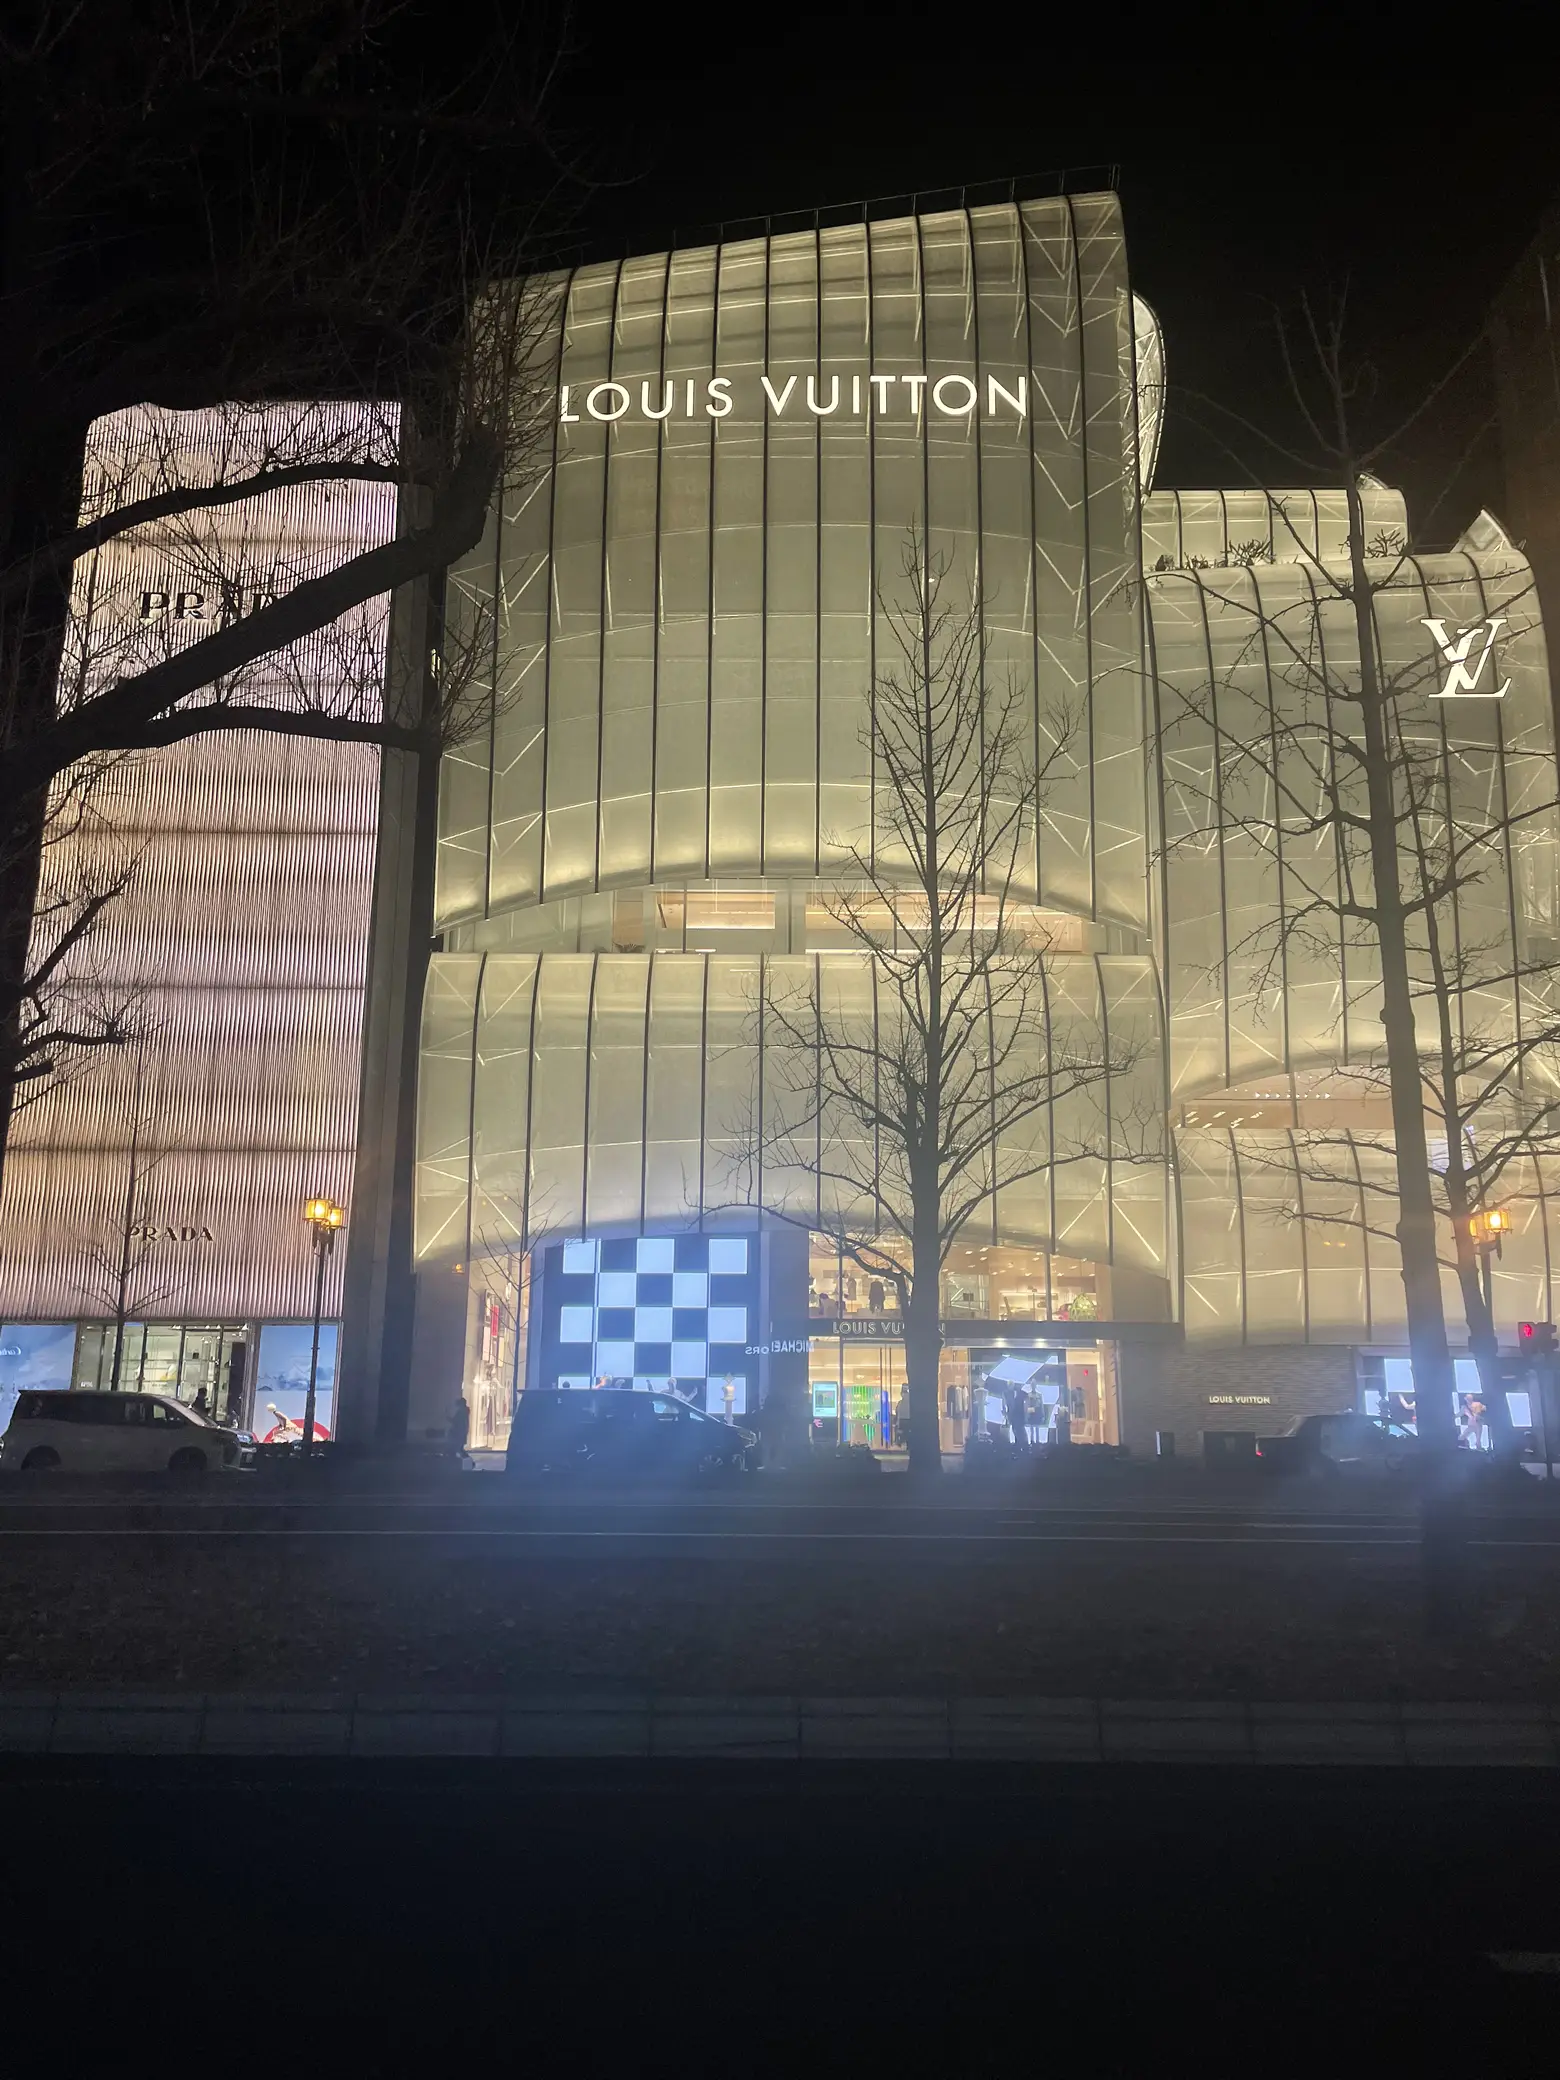 Did you know about the SECRET Louis Vuitton restaurant in Osaka?!